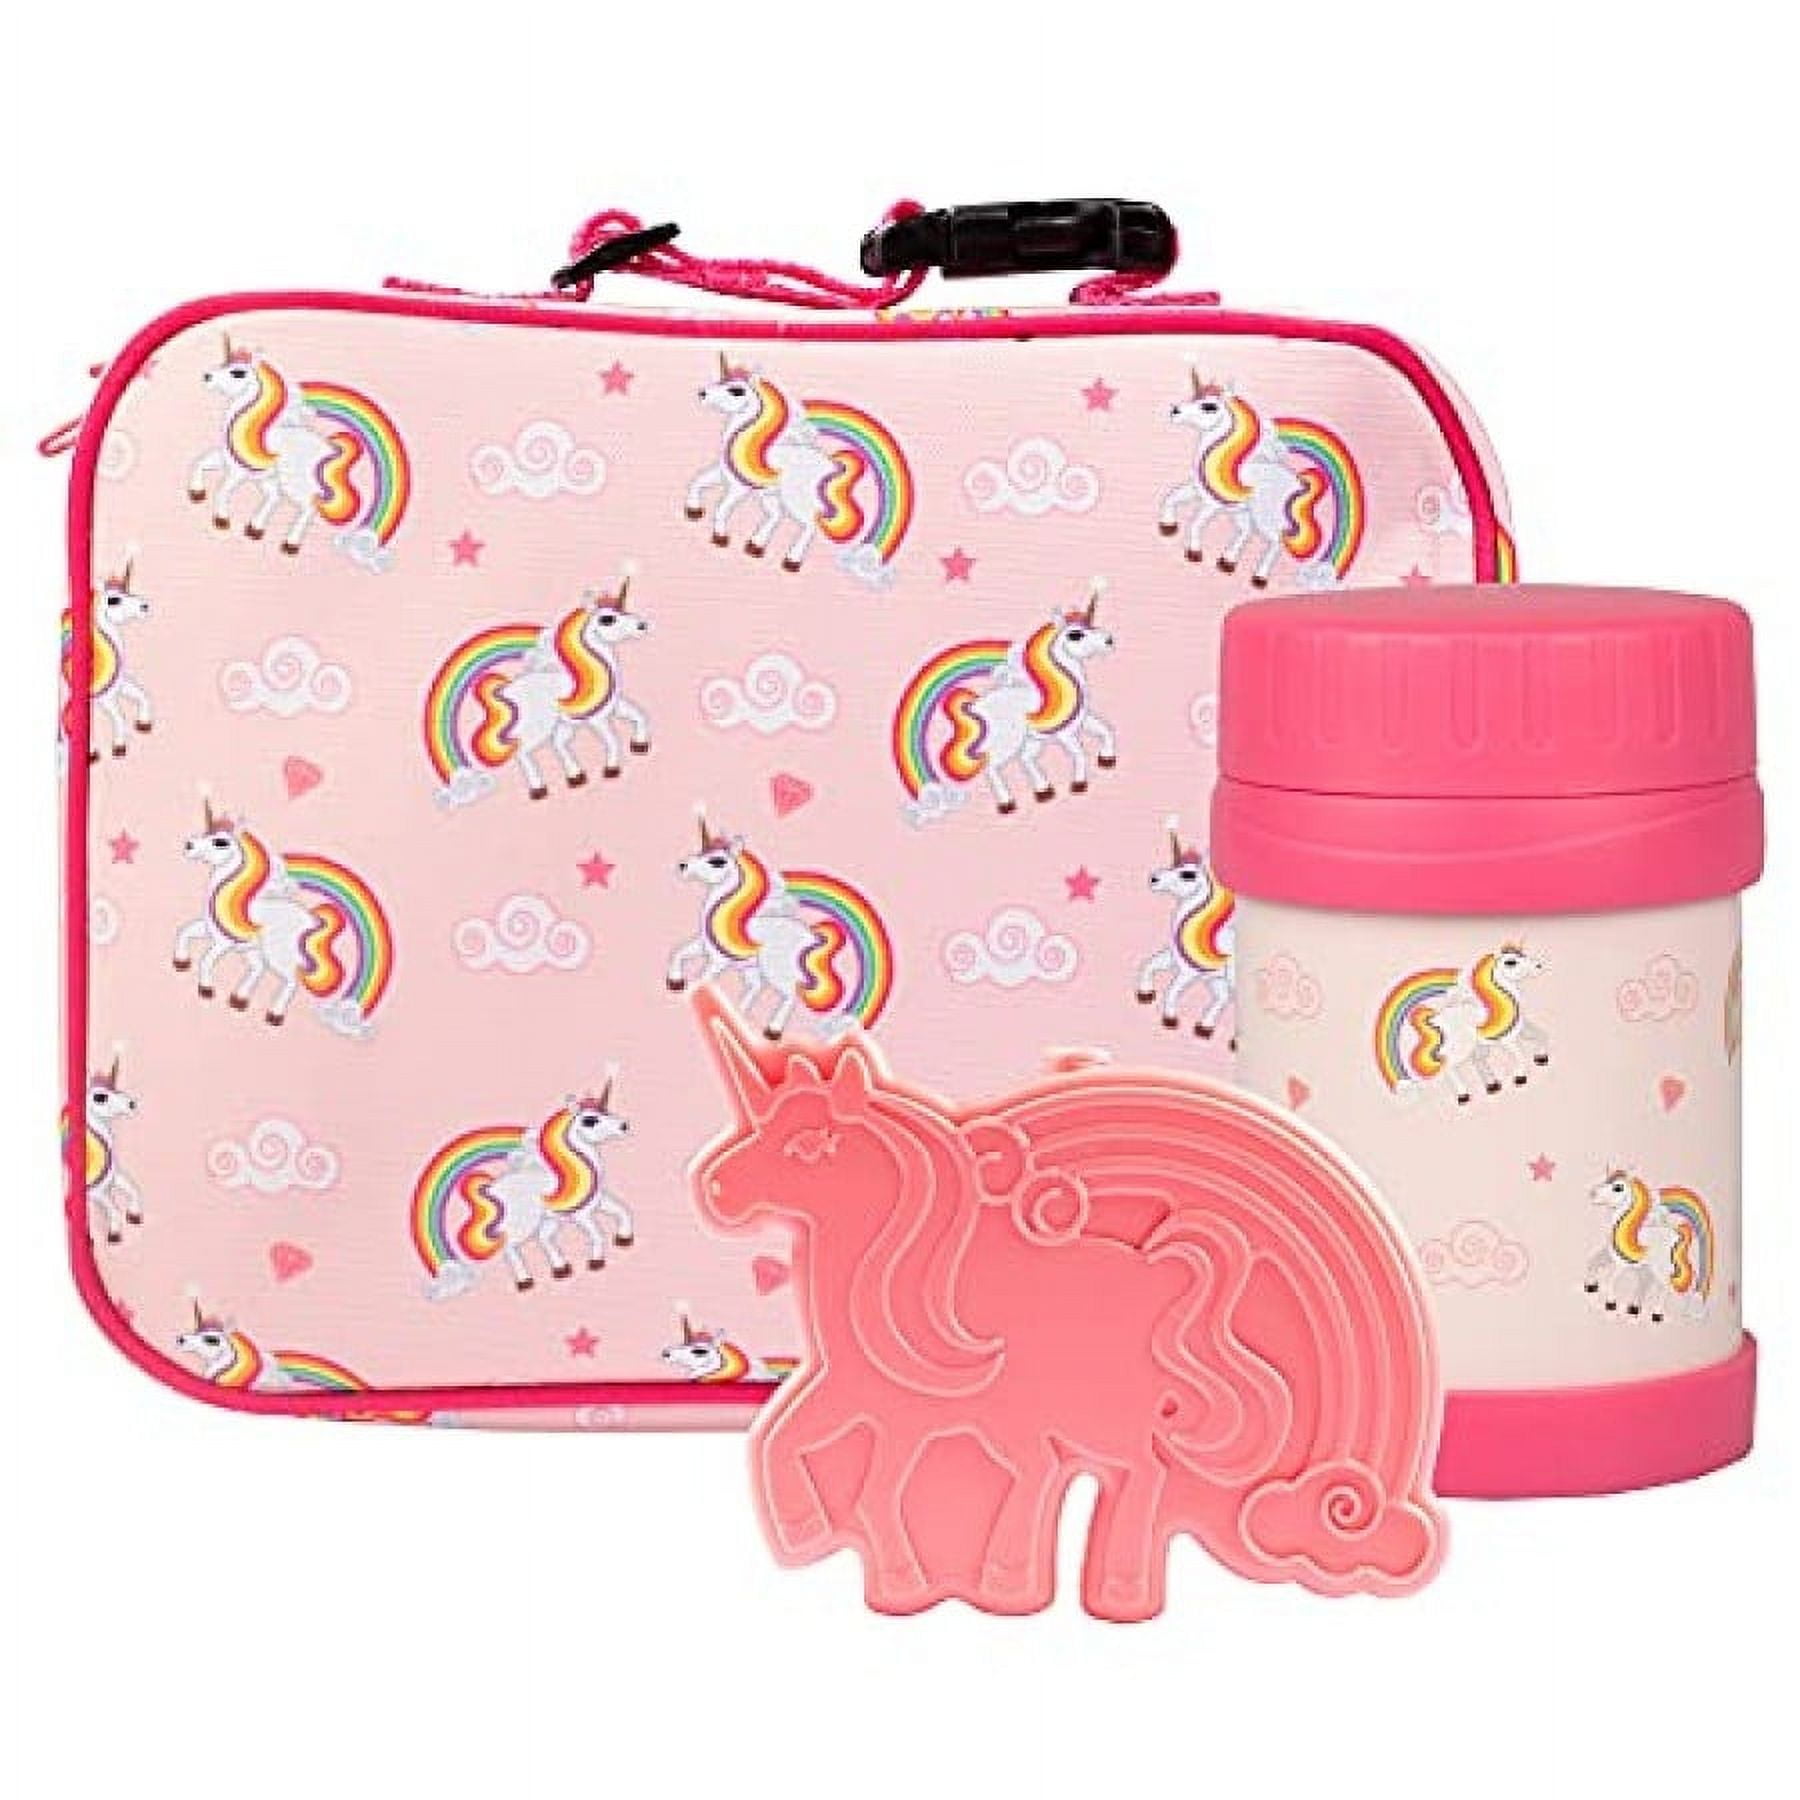 Bentology Kids Lunch Bag Set (Unicorn) W Reusable Hard Ice Pack and Double-Insulated Food Jar - Perfect Lunchbox Kits for Girls Back to School